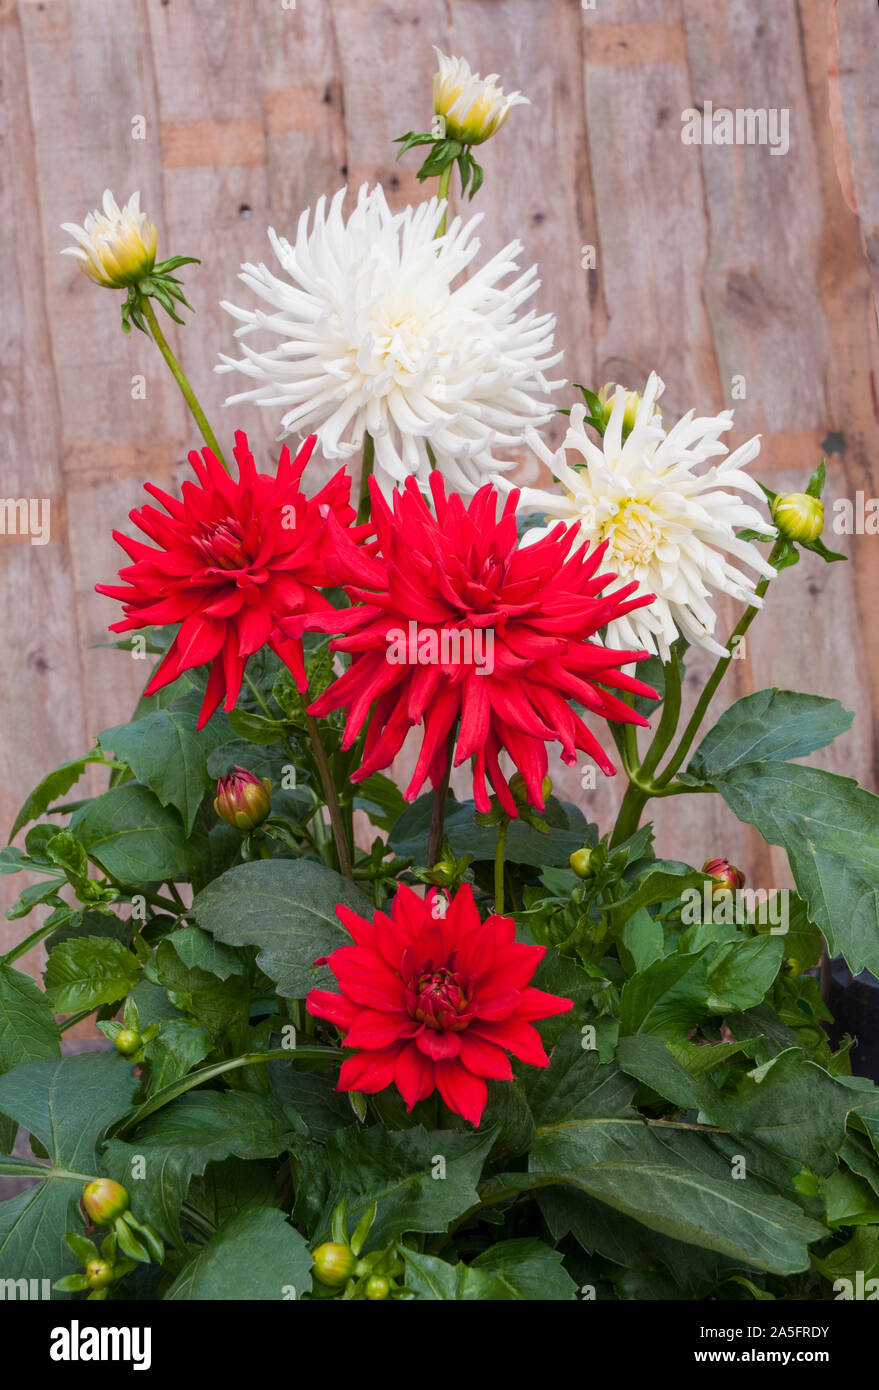 Group of Red Pygmy cactus dahlia flowers with white dahlias Playa Blanca behind them  Tuberous plants that are deciduous and half hardy Stock Photo